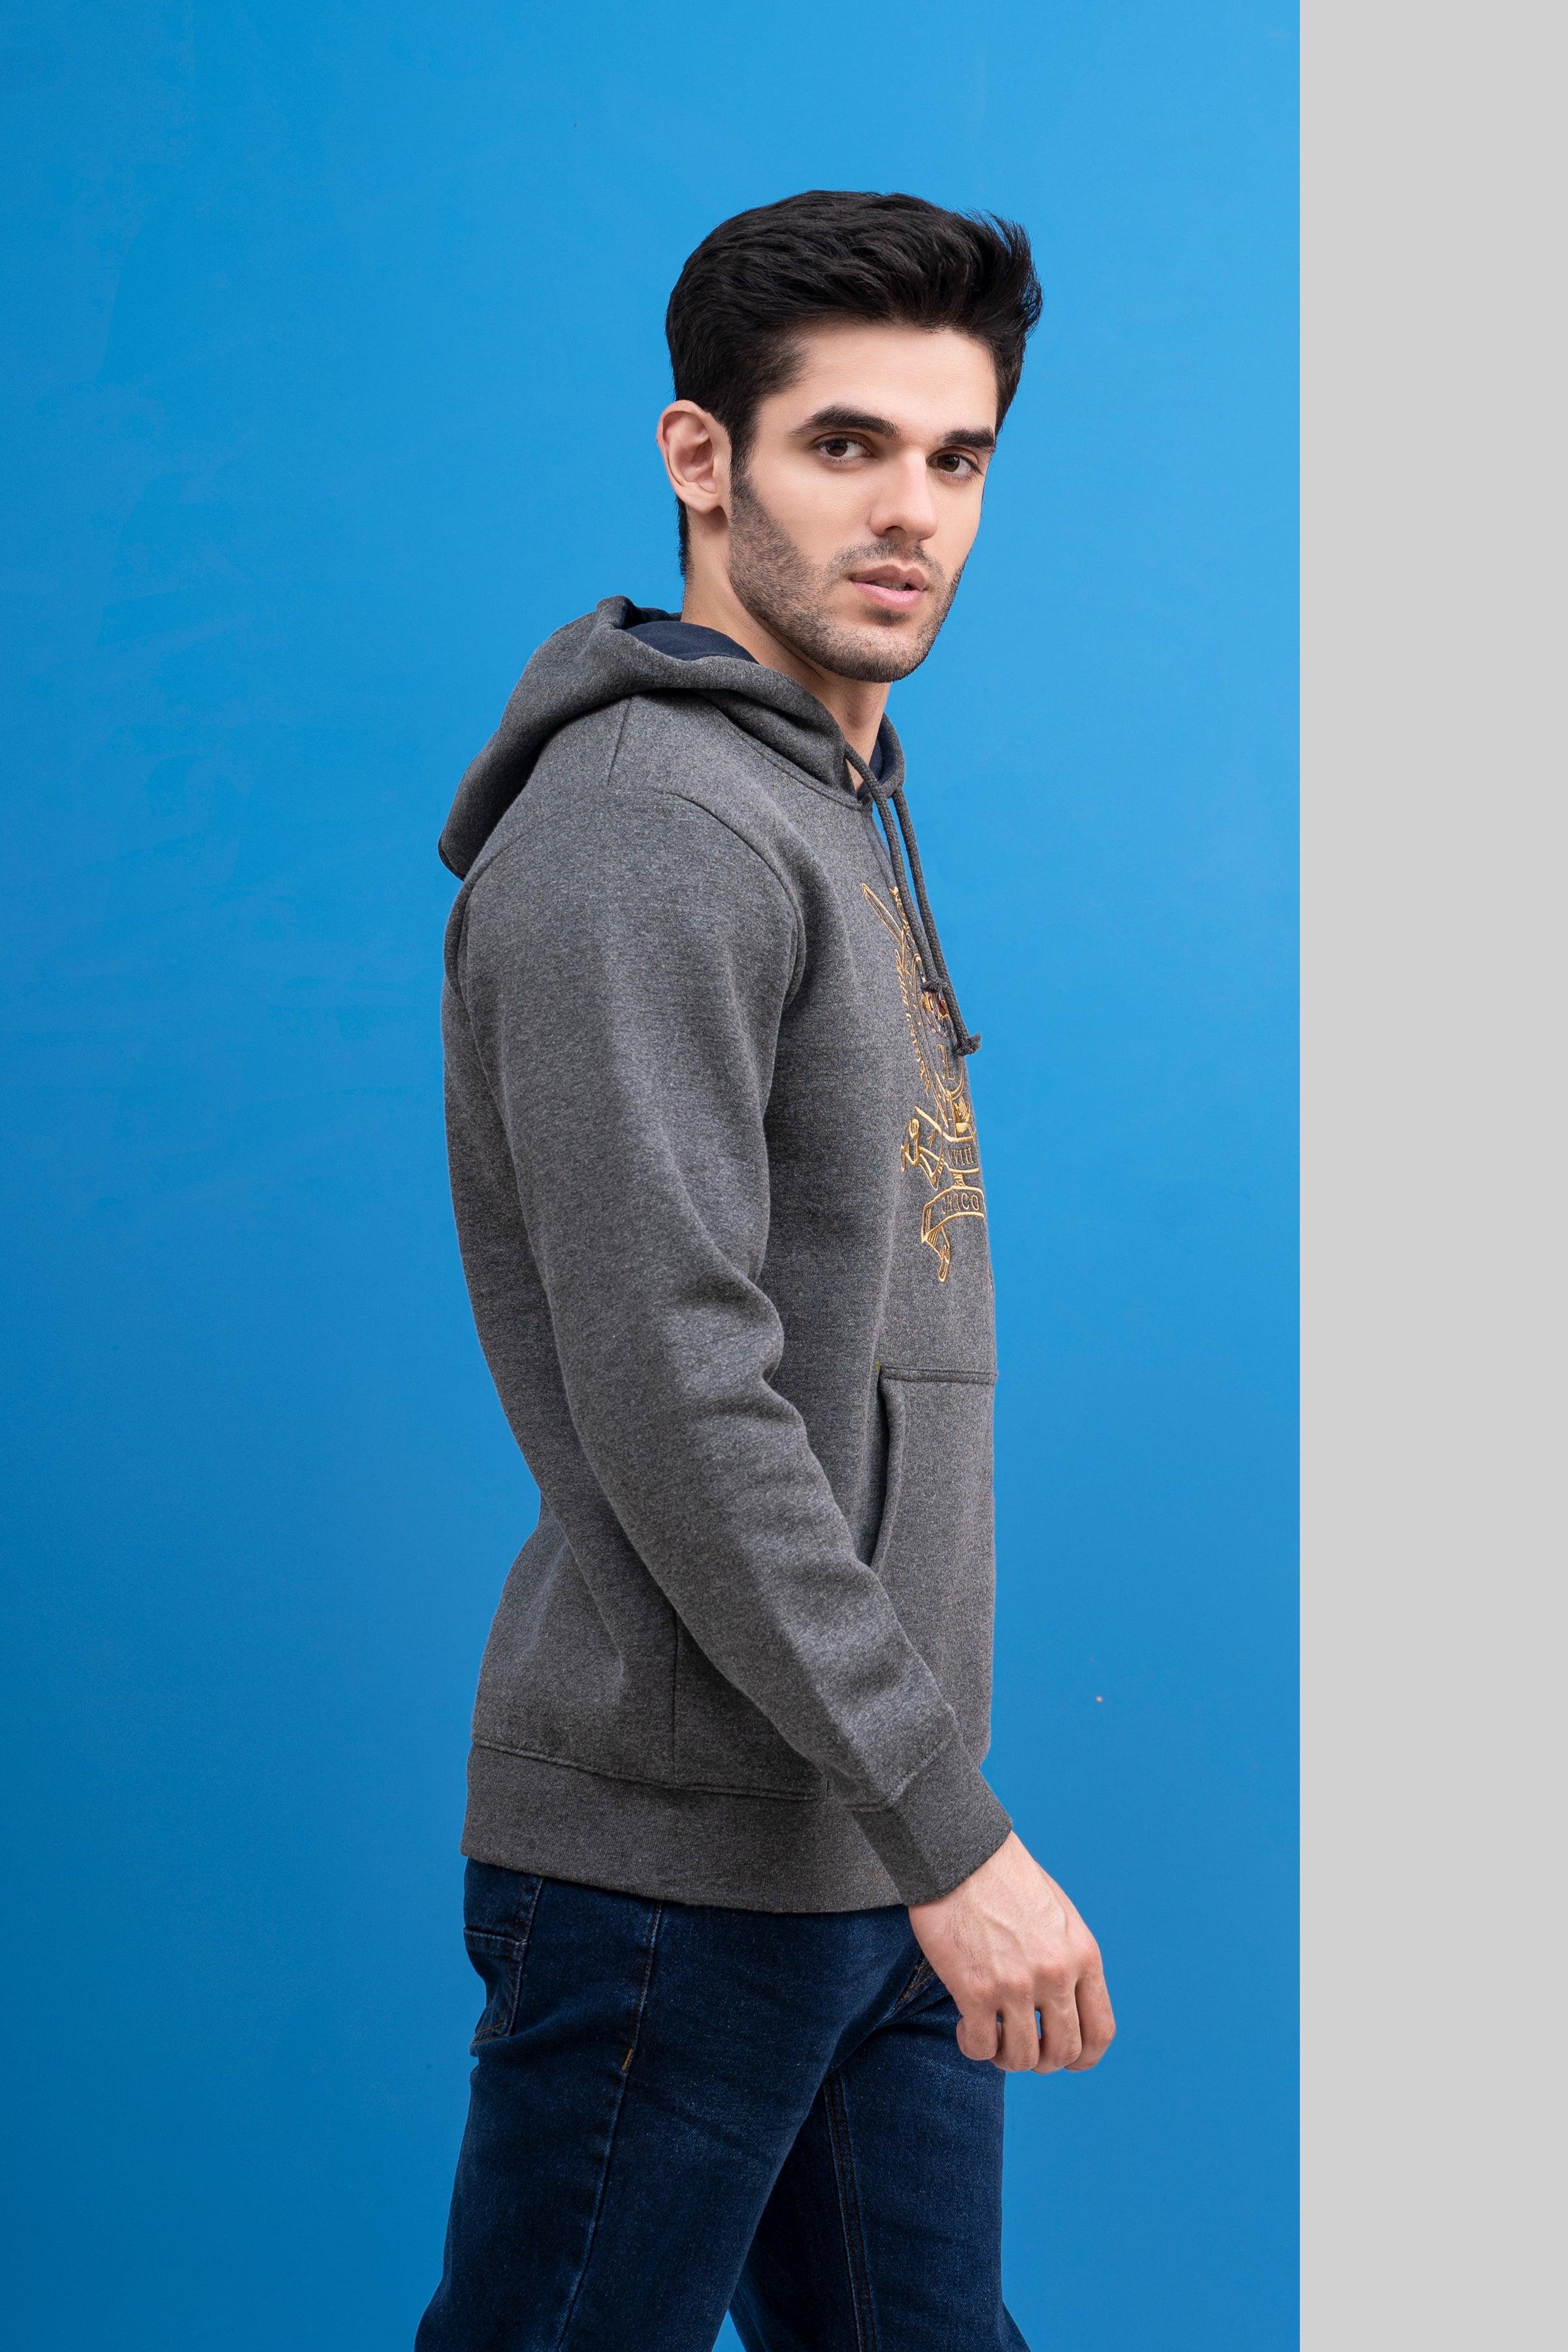 HOODIE FULL SLEEVE CHARCOAL GREY at Charcoal Clothing